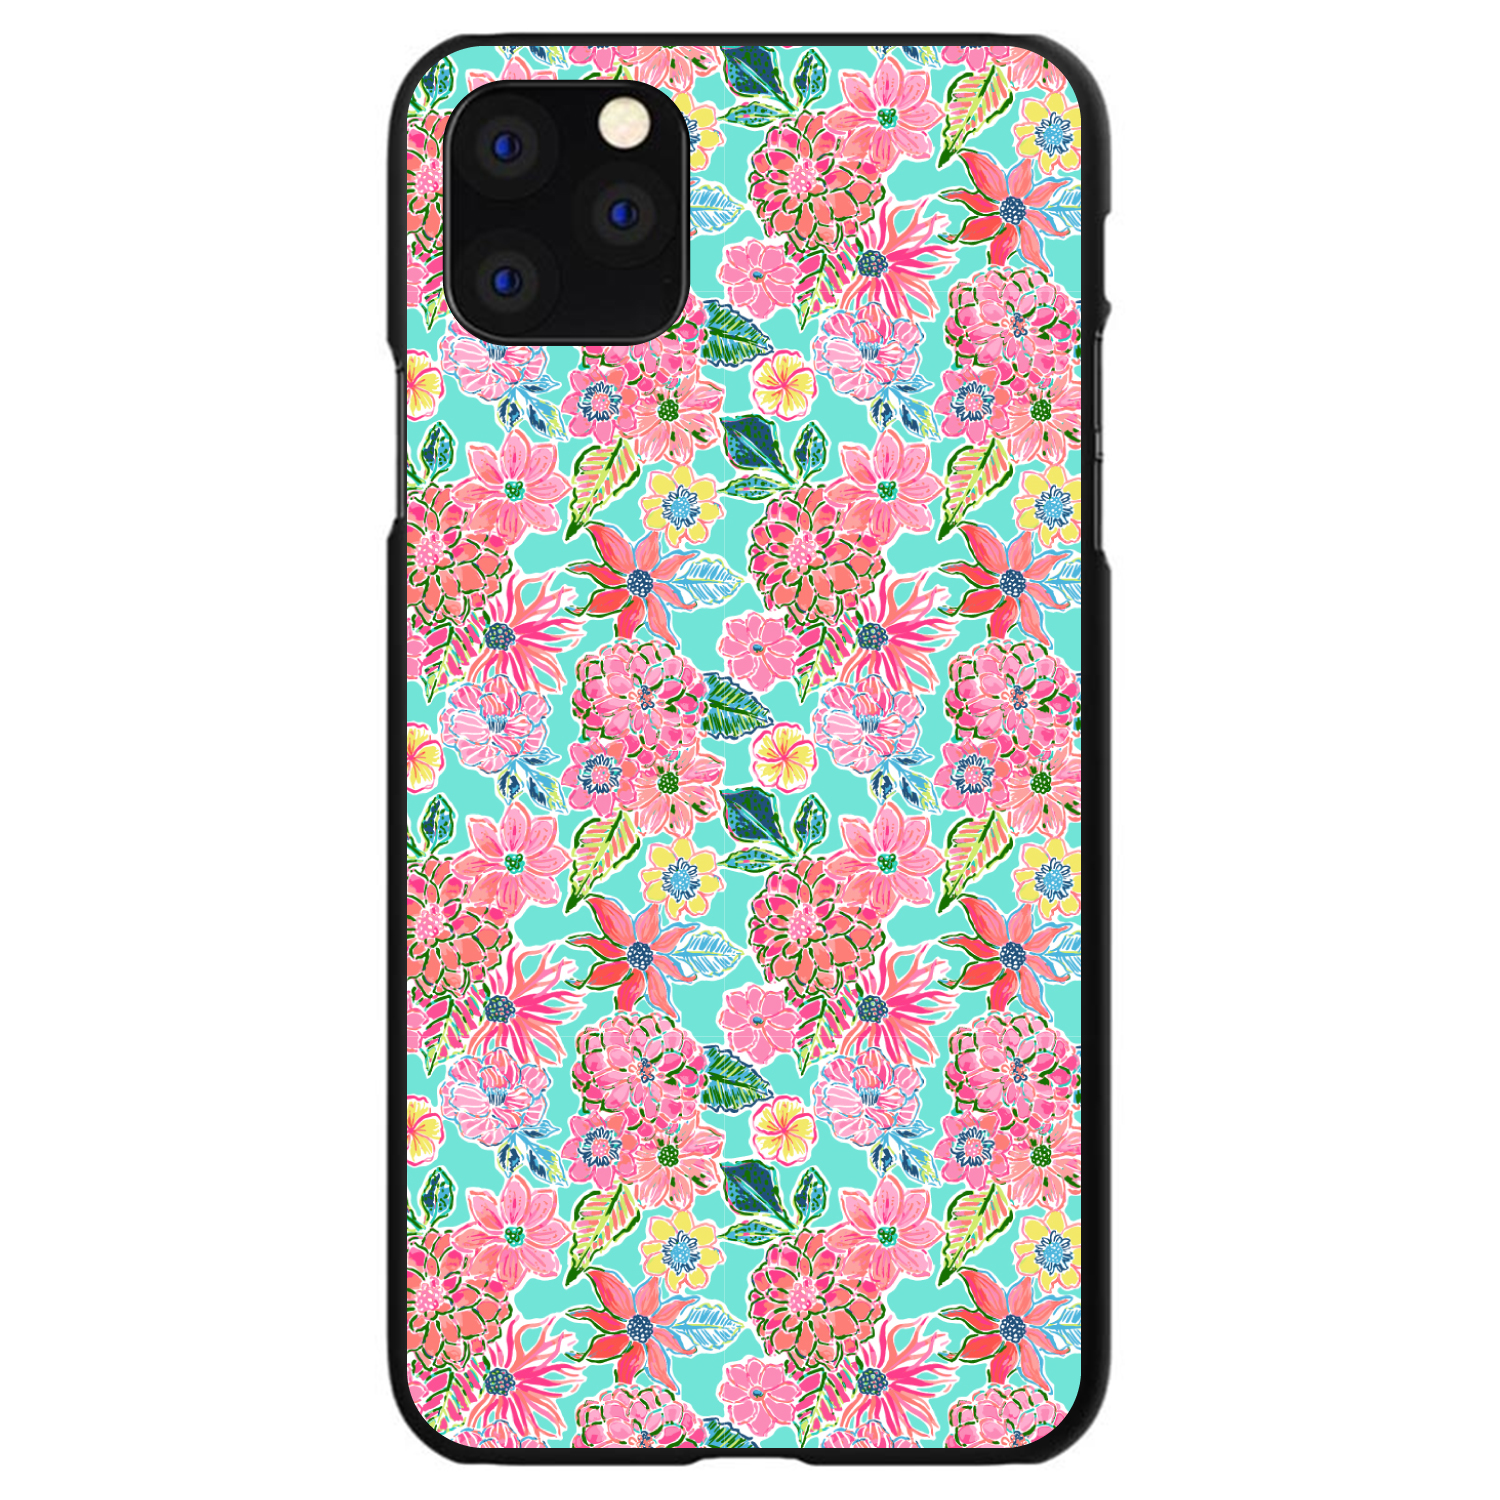 Hard Case Cover for iPhone / Samsung Galaxy Preppy Flowers on Teal  Background